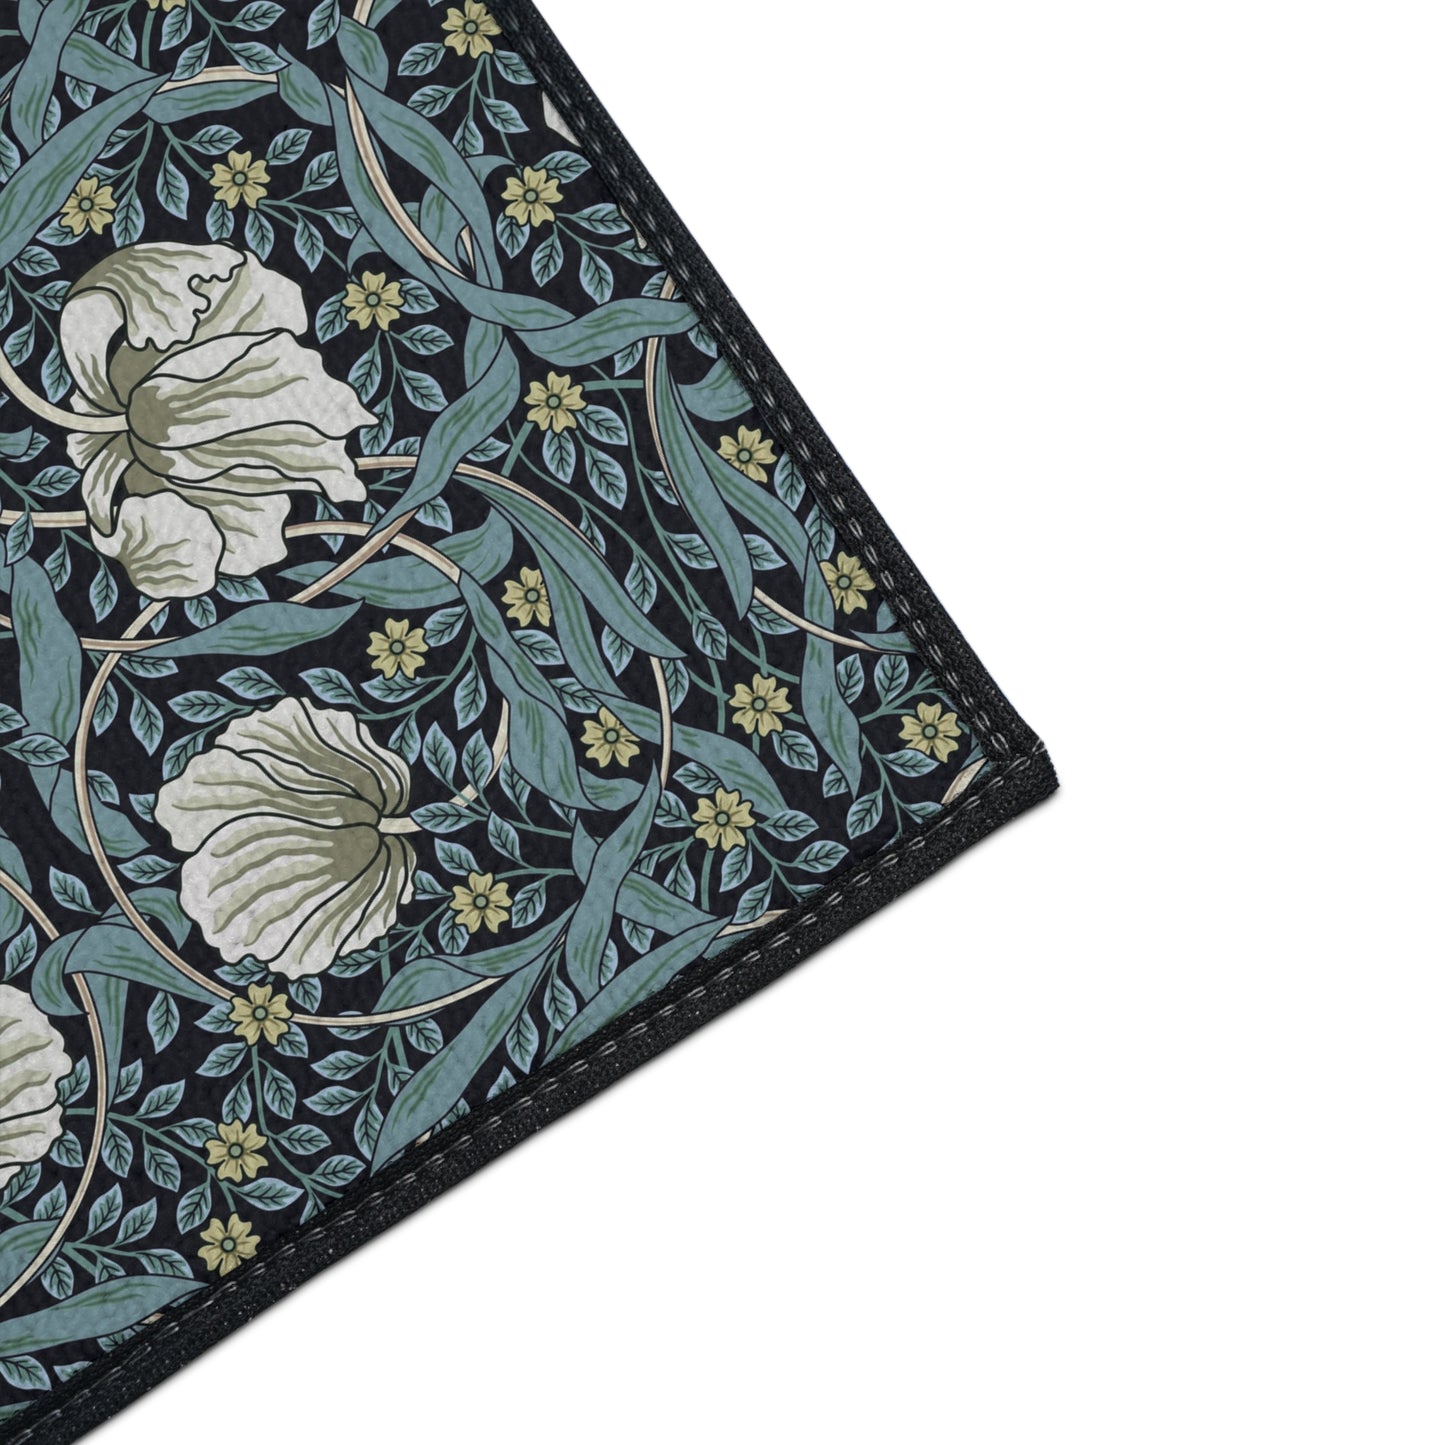 william-morris-co-heavy-duty-floor-mat-pimpernel-collection-slate-14